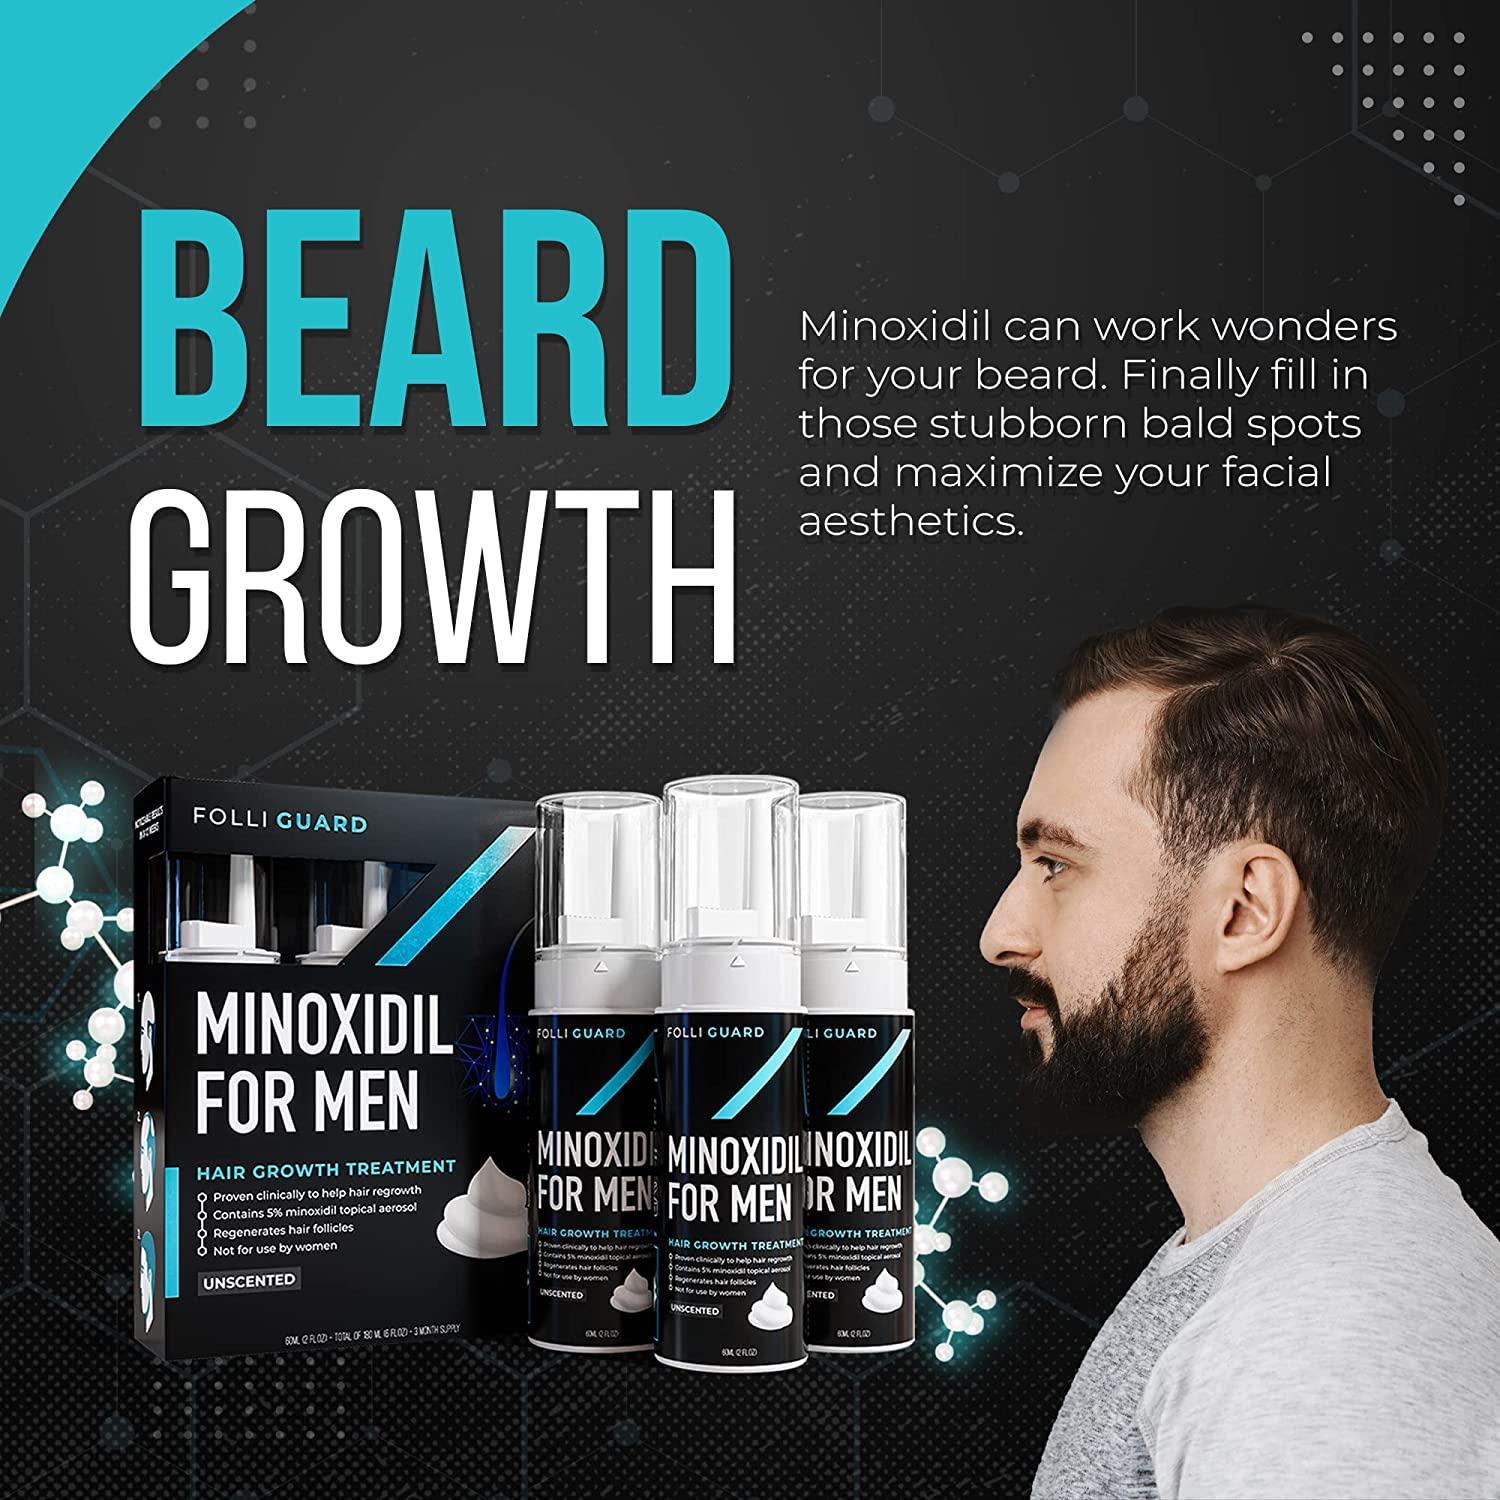 Minoxidil 5% Foam (3 Month Supply) by FolliGuard - Aerosol Foam Hair  Regrowth Treatment for Men with Added Biotin and Herbs - Extra Strength for  Men